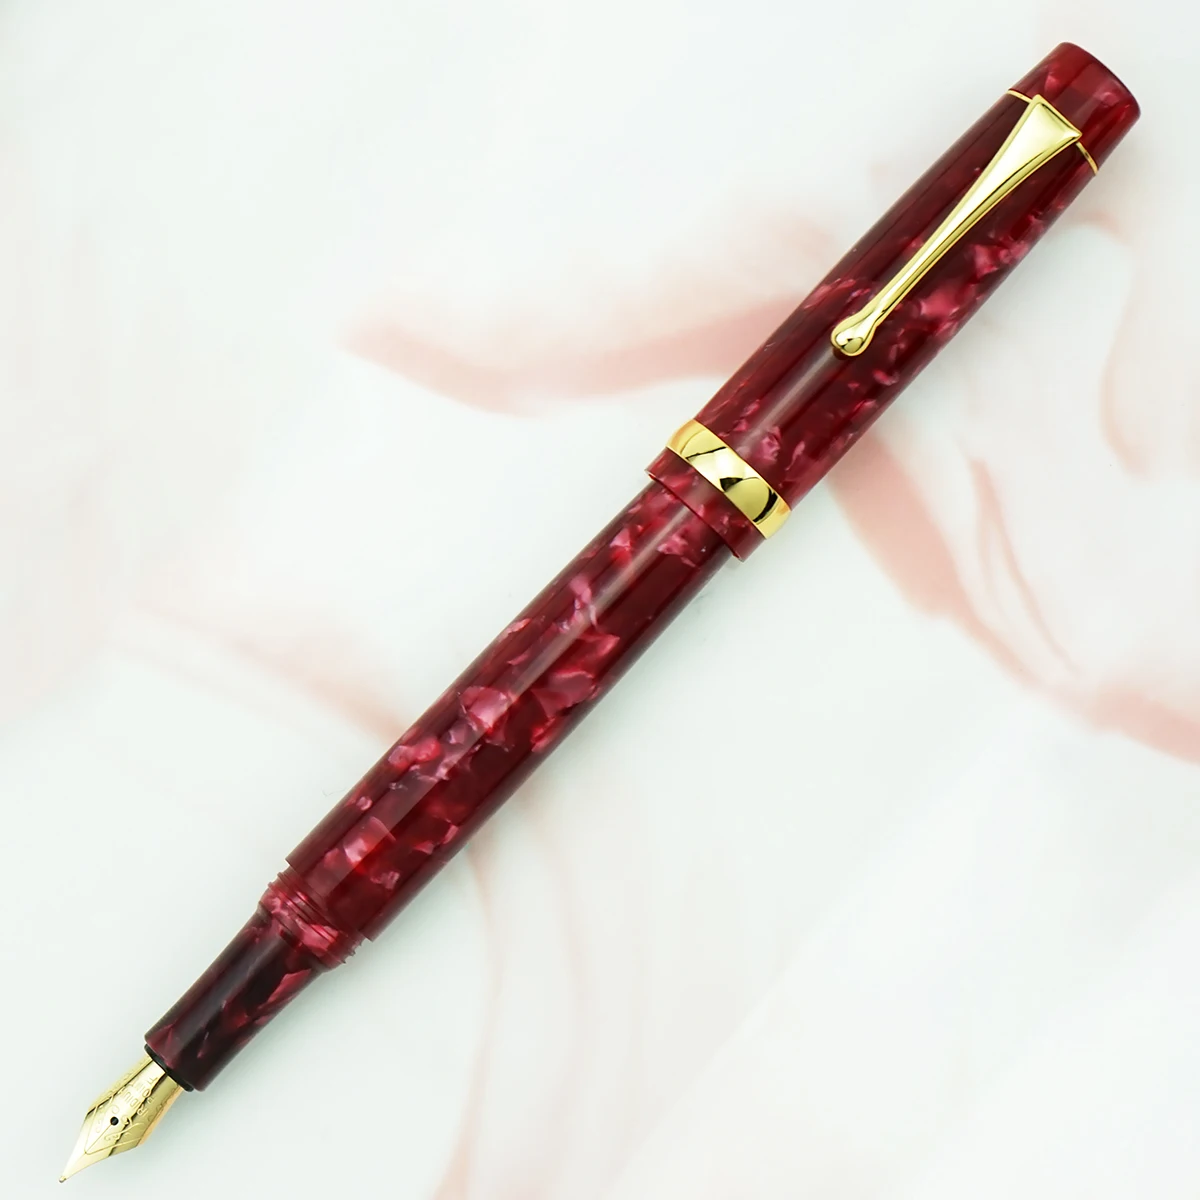 Jinhao Resin Acrylic Red Fountain Pen Beautiful Ink Pen with Converter EF/F/Bent Nib Business Office School Writing Gift Pen jinhao 82 fountain pen customized mixed macaron color acrylic ef f m bent nib golden trim with converter writing pen